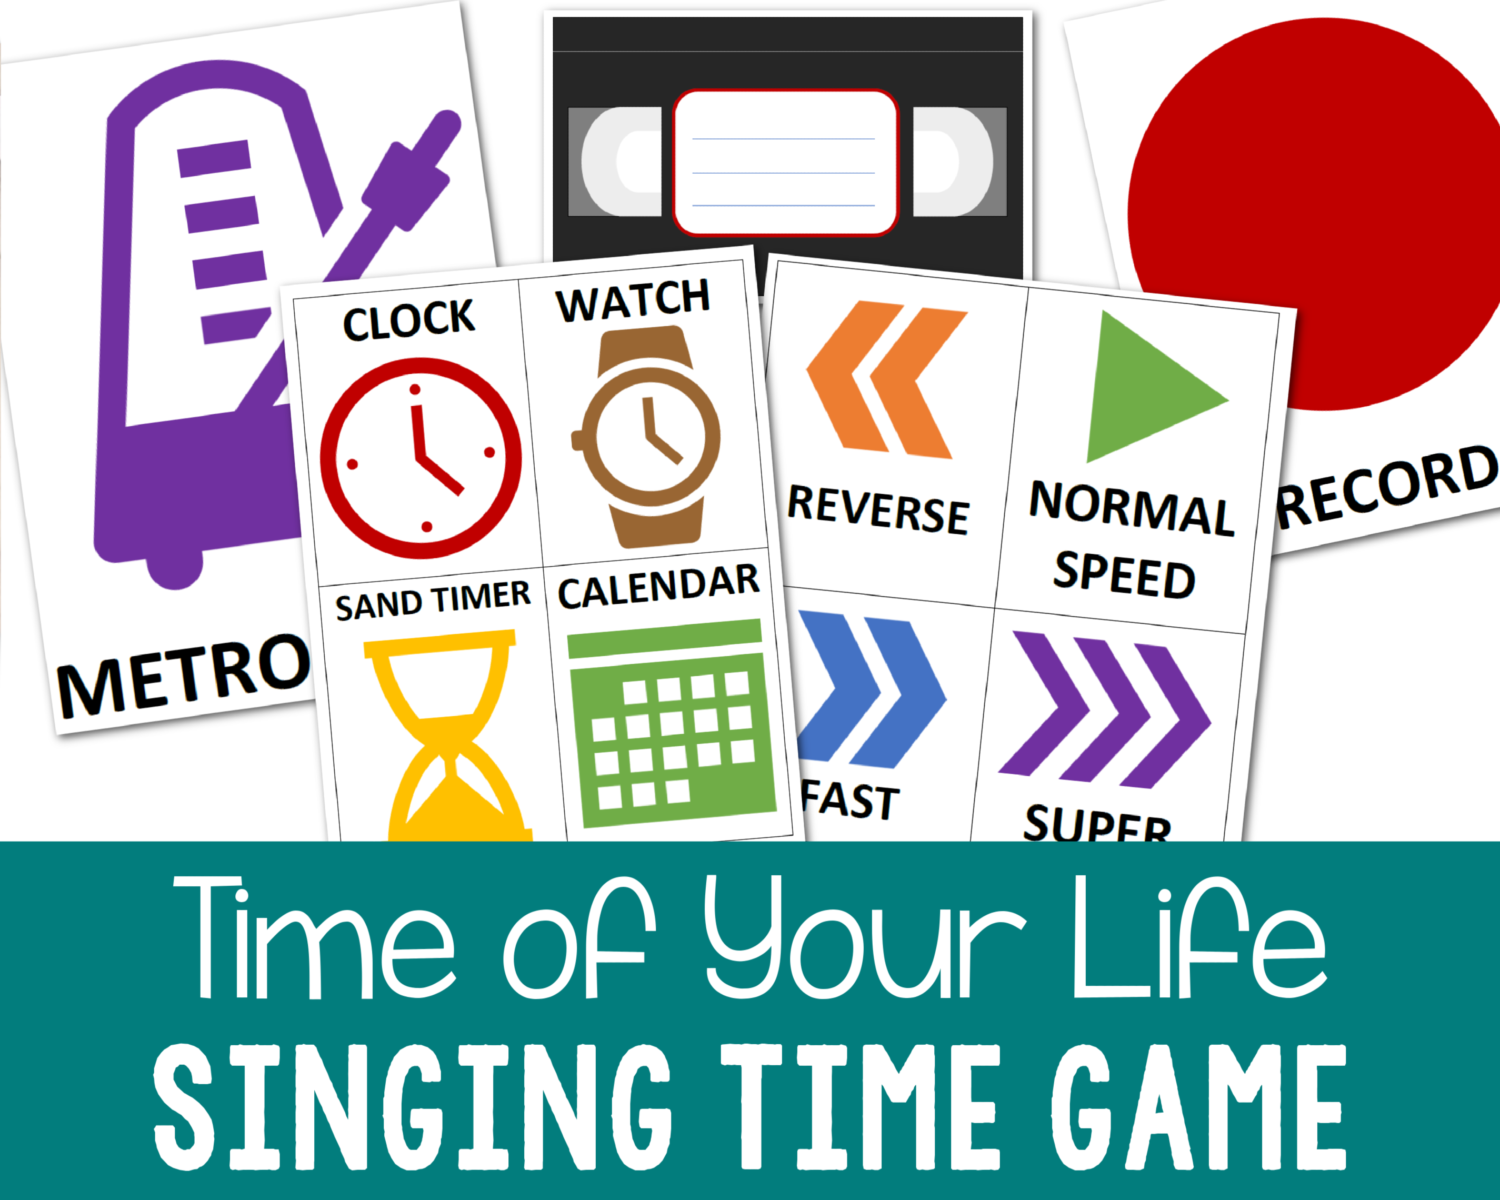 Time of Your Life Singing Time Game New Year